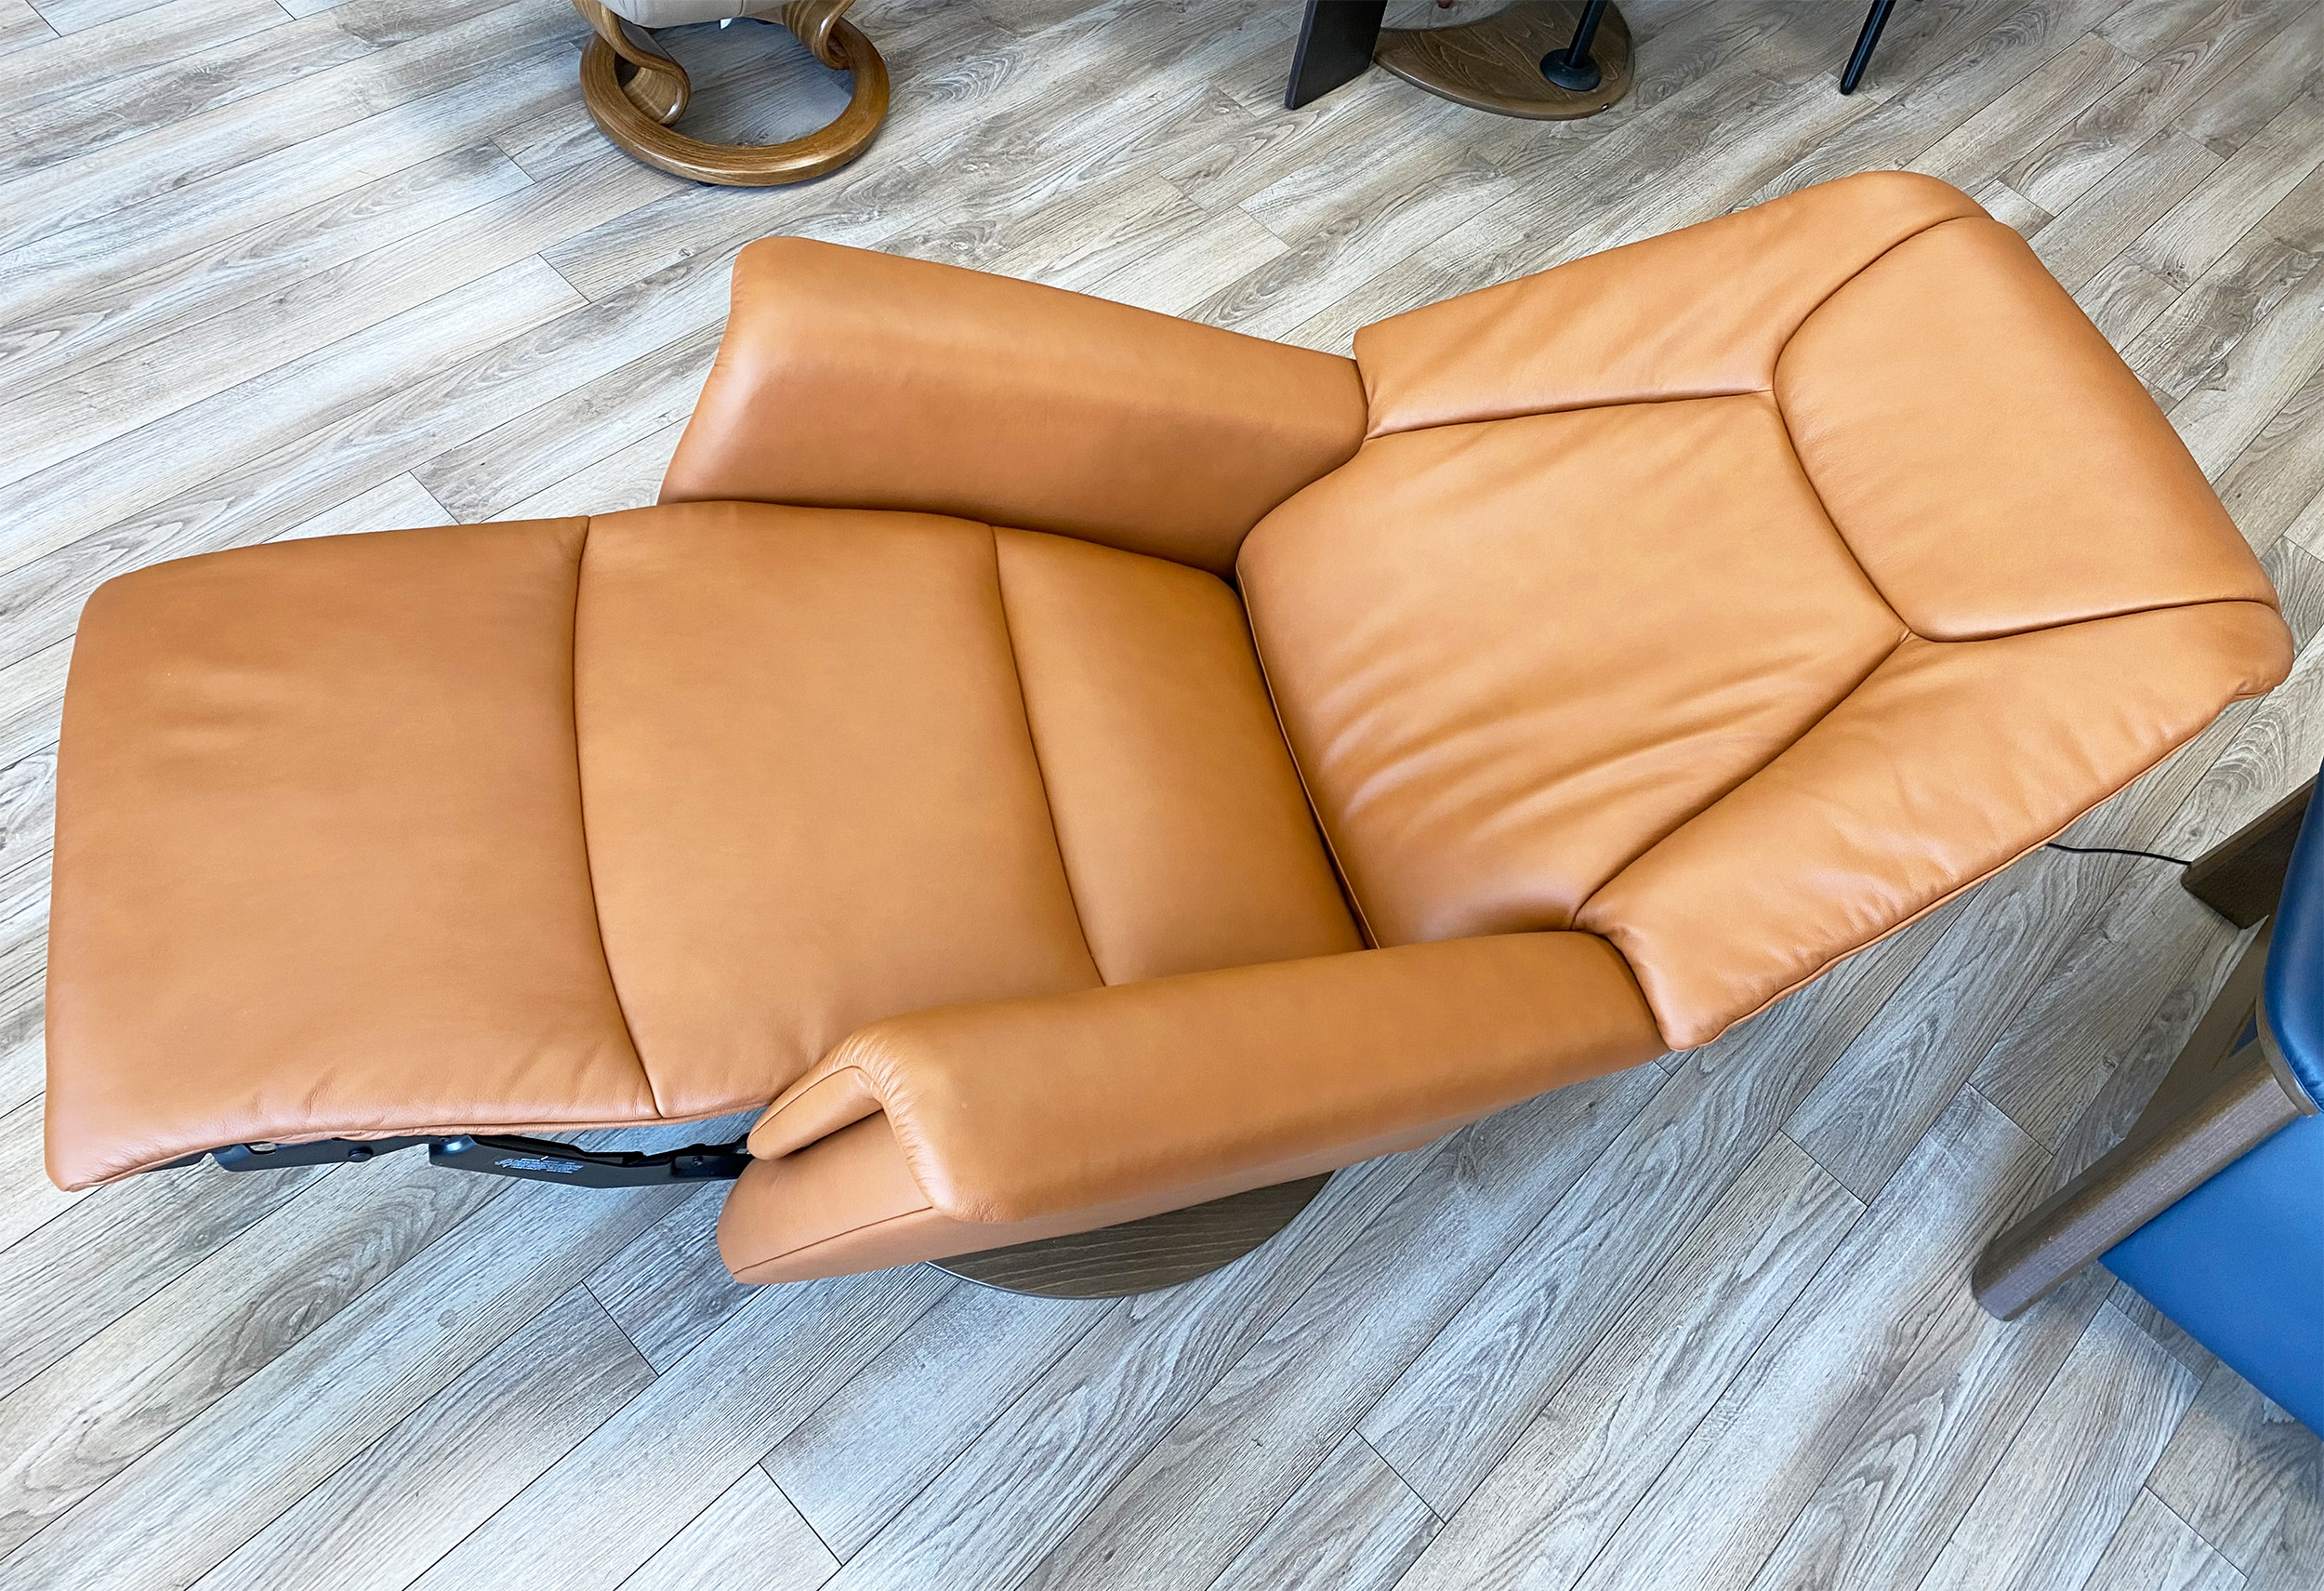 Stressless Scott Power Recliner Chair with Heat & Massage Function in  Paloma New Cognac